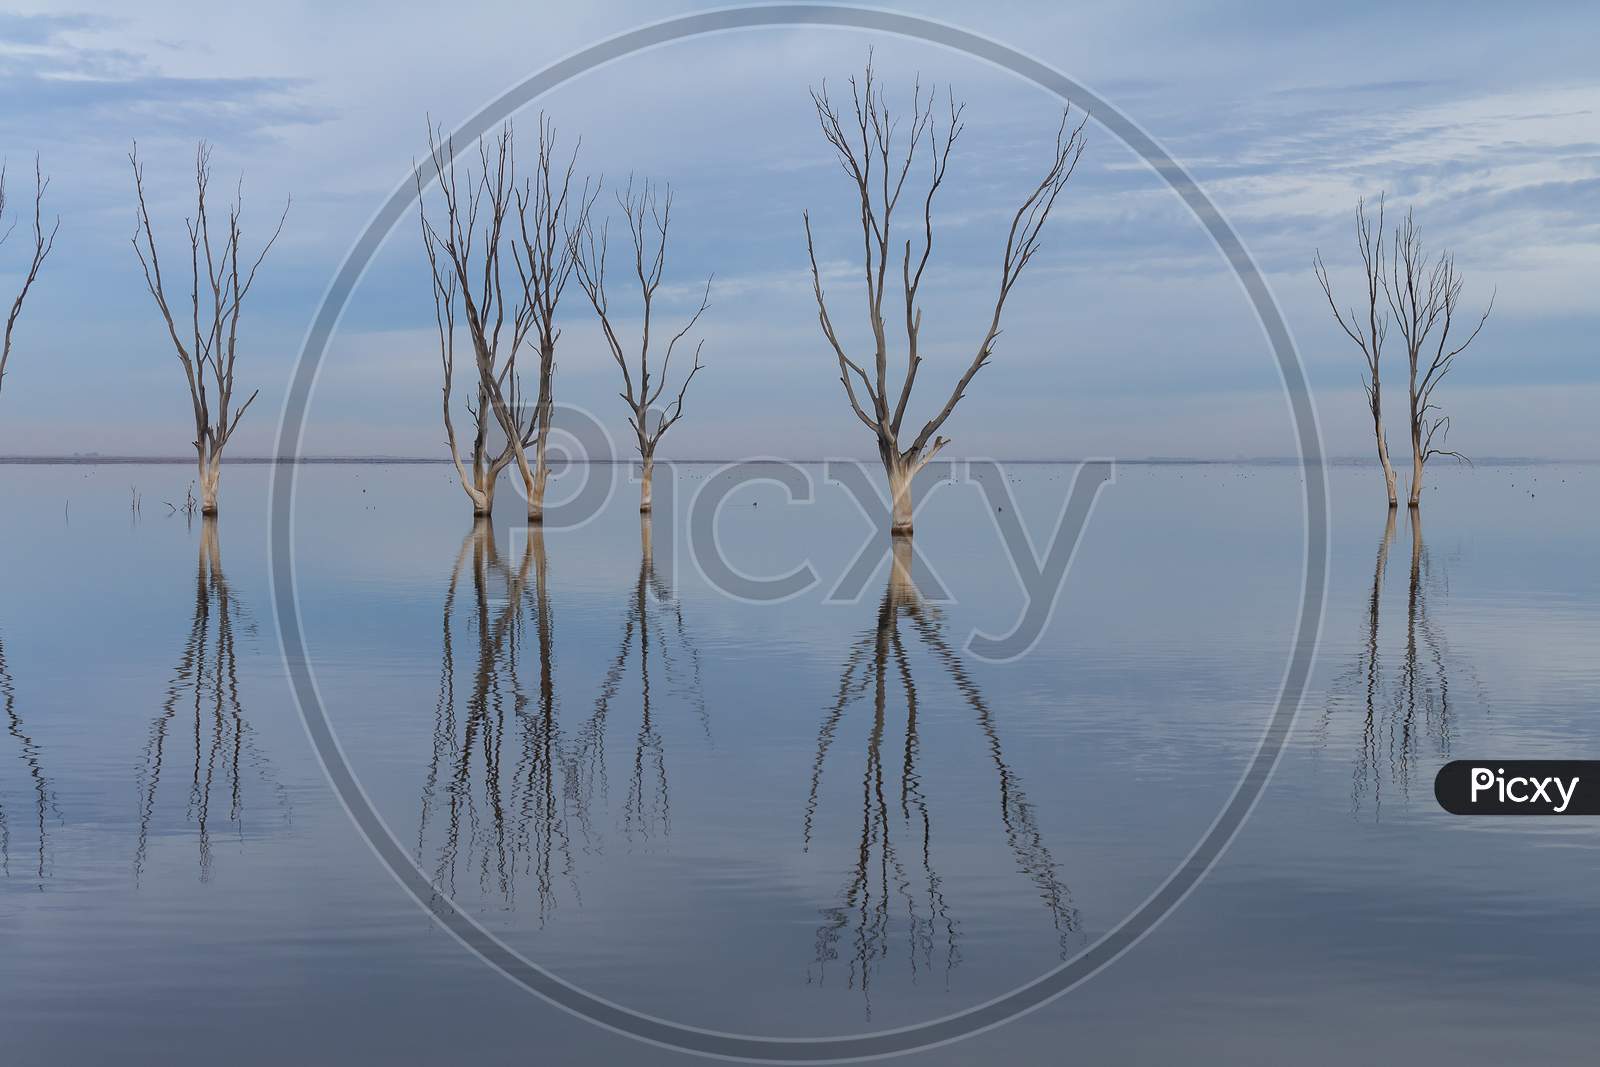 Dry Trees Submerged In The Lake. The Branches Without Leaves Are Reflected In The Calm Of The Water.